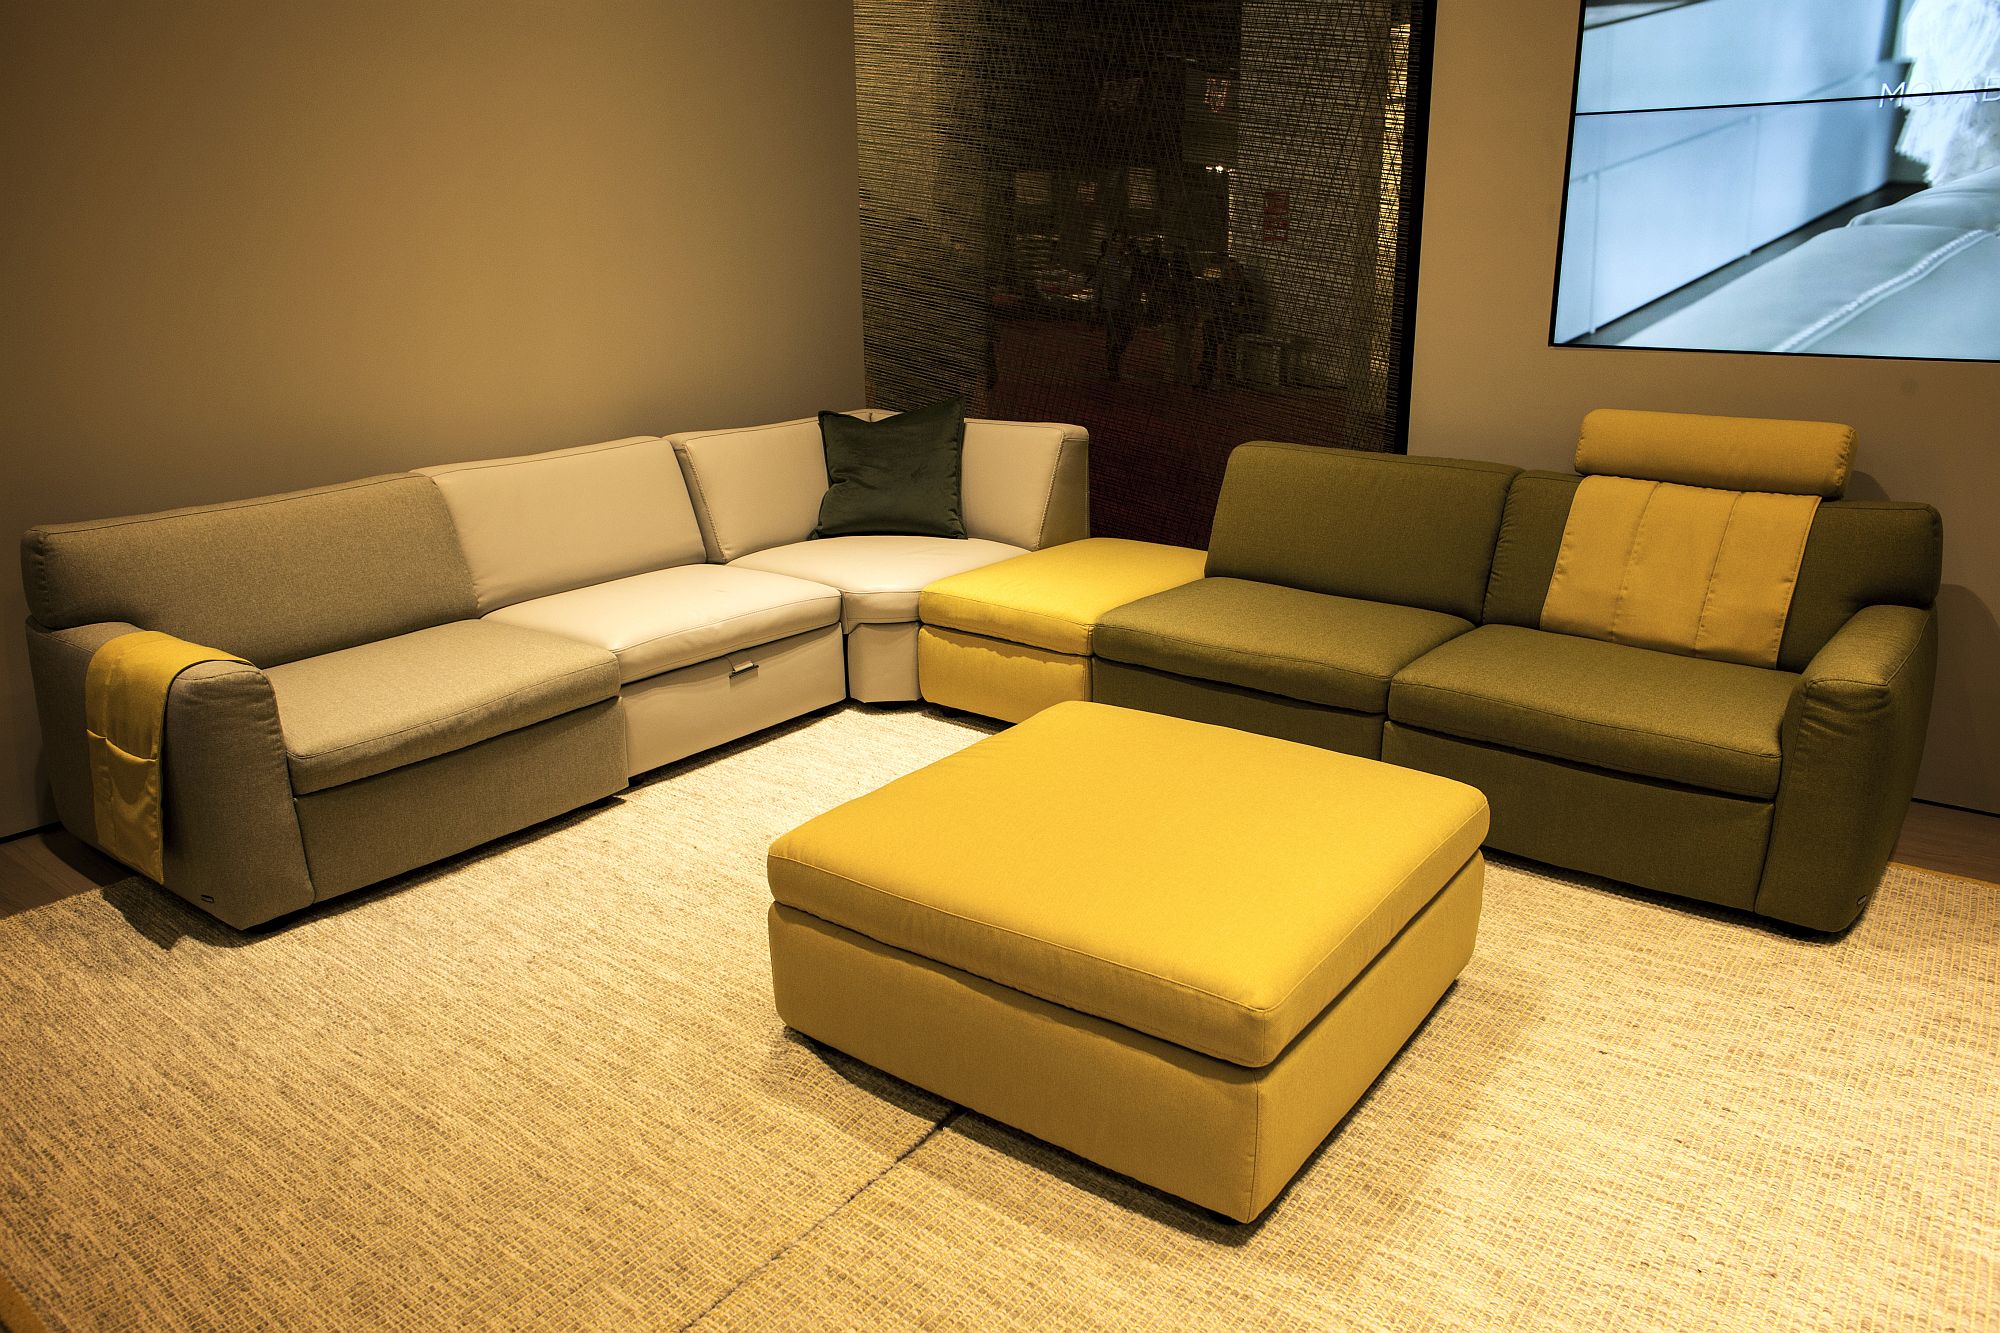 Colorful-and-eclectic-modular-sofa-offers-decorating-freedom